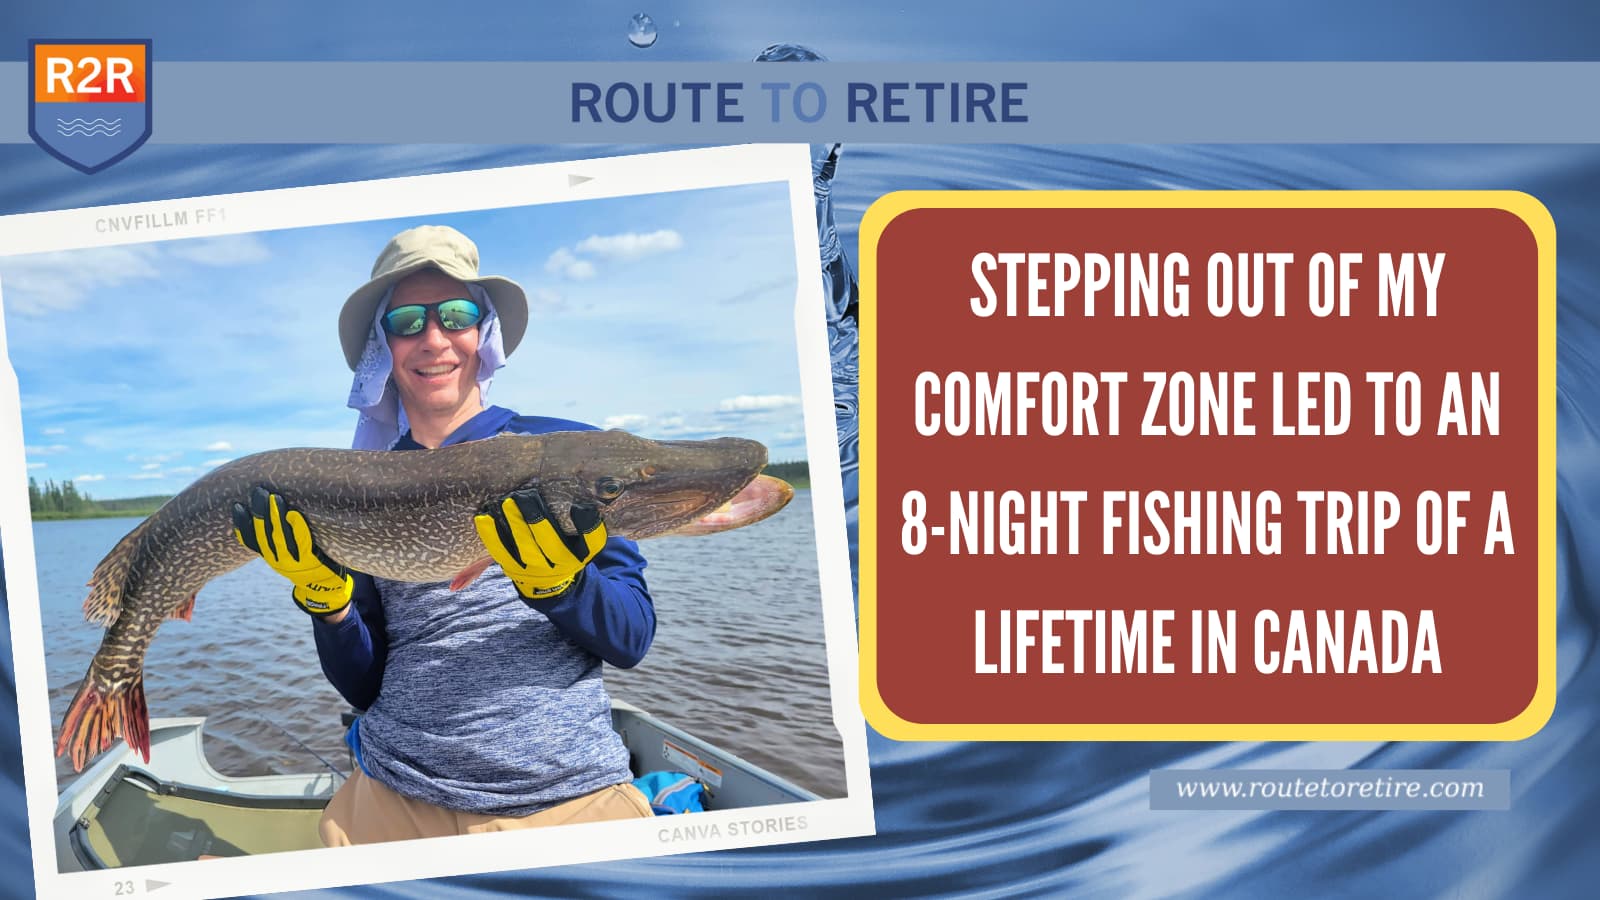 Stepping Out of My Comfort Zone Led to an 8-Night Fishing Trip of a Lifetime in Canada